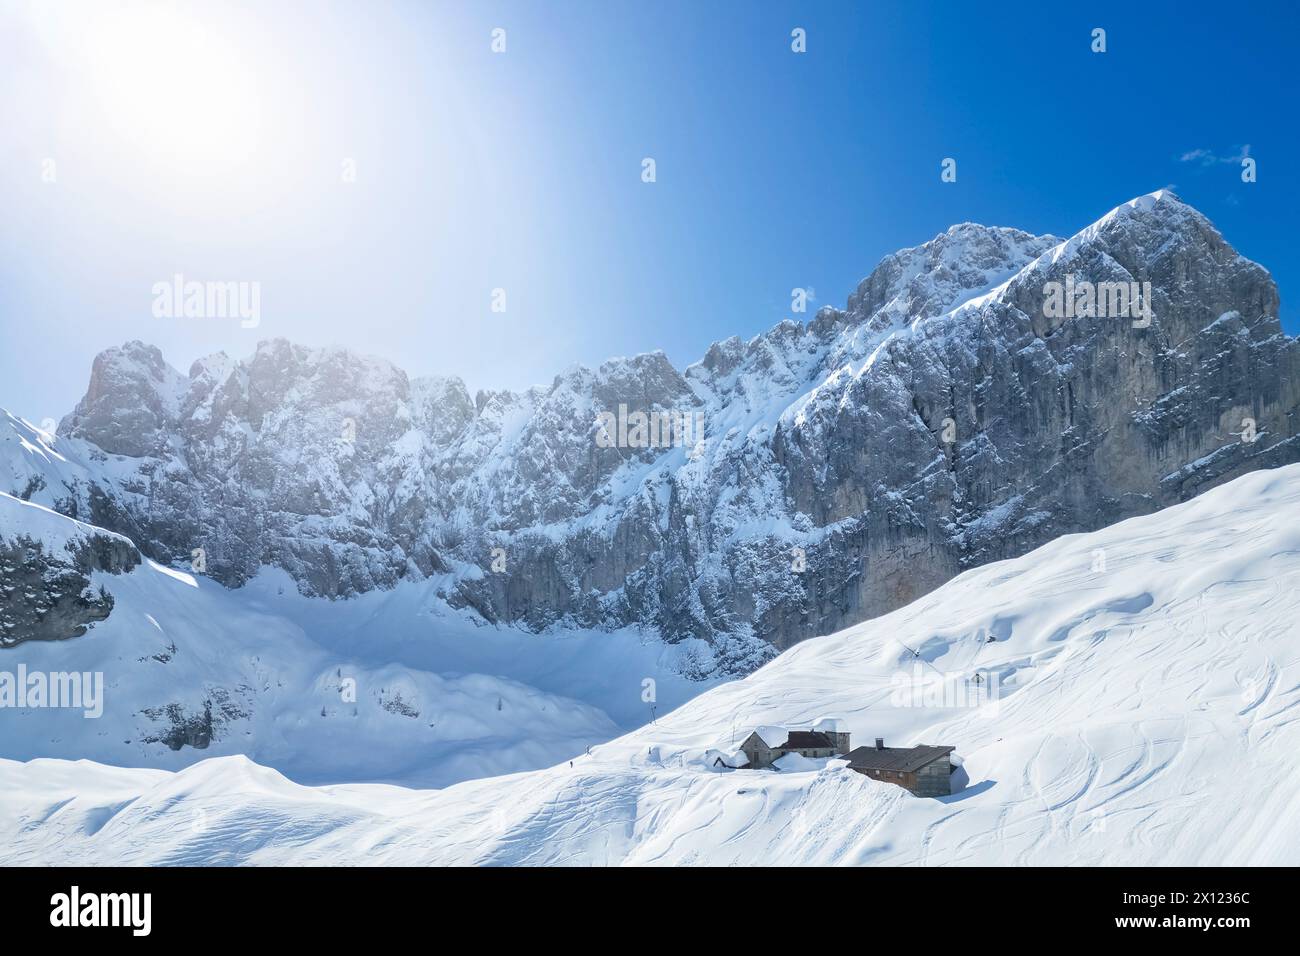 Aerial view of the Albani refuge and the north face of the Presolana in winter. Val di Scalve, Bergamo district, Lombardy, Italy, Southern Europe. Stock Photo